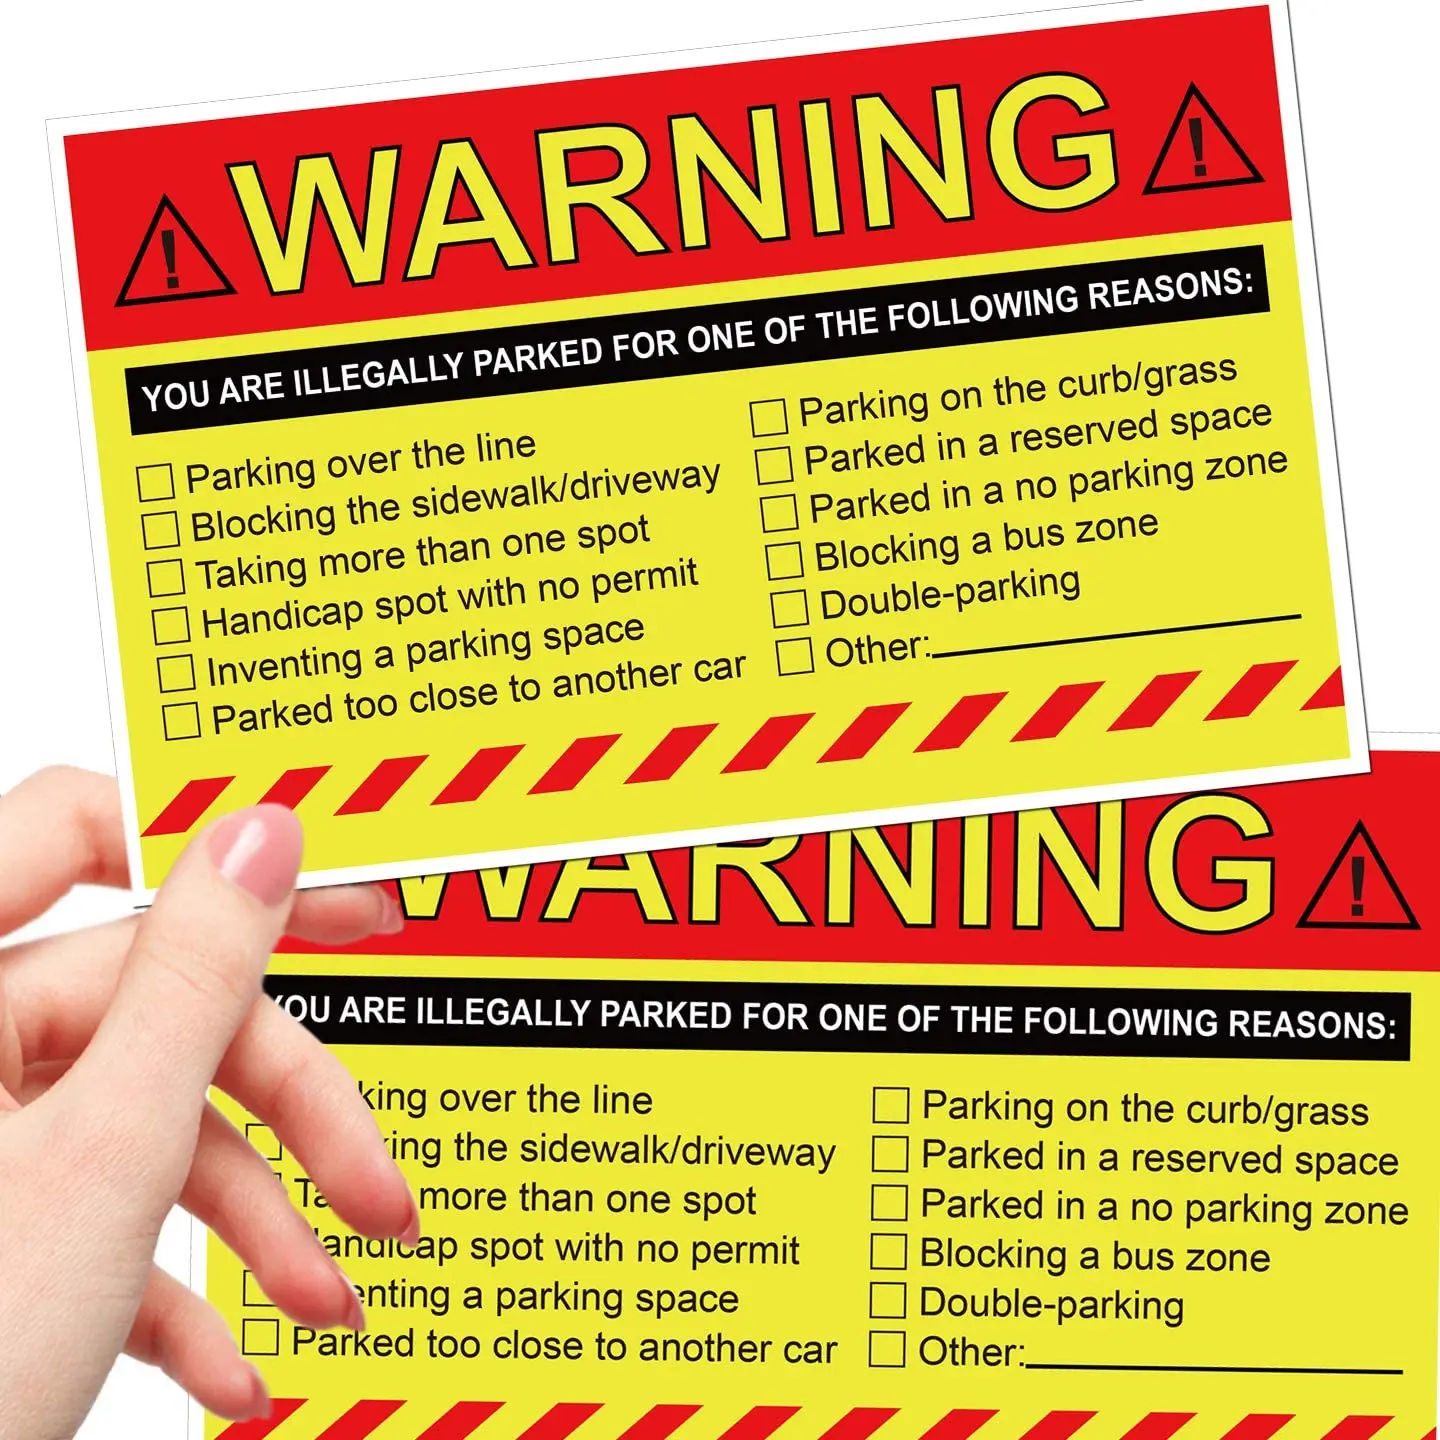 50 Pcs Decor No Parking Warning Stickers Car Window You Are Illegally Parked Parking Violation Tow Away Stickers For Vehicles